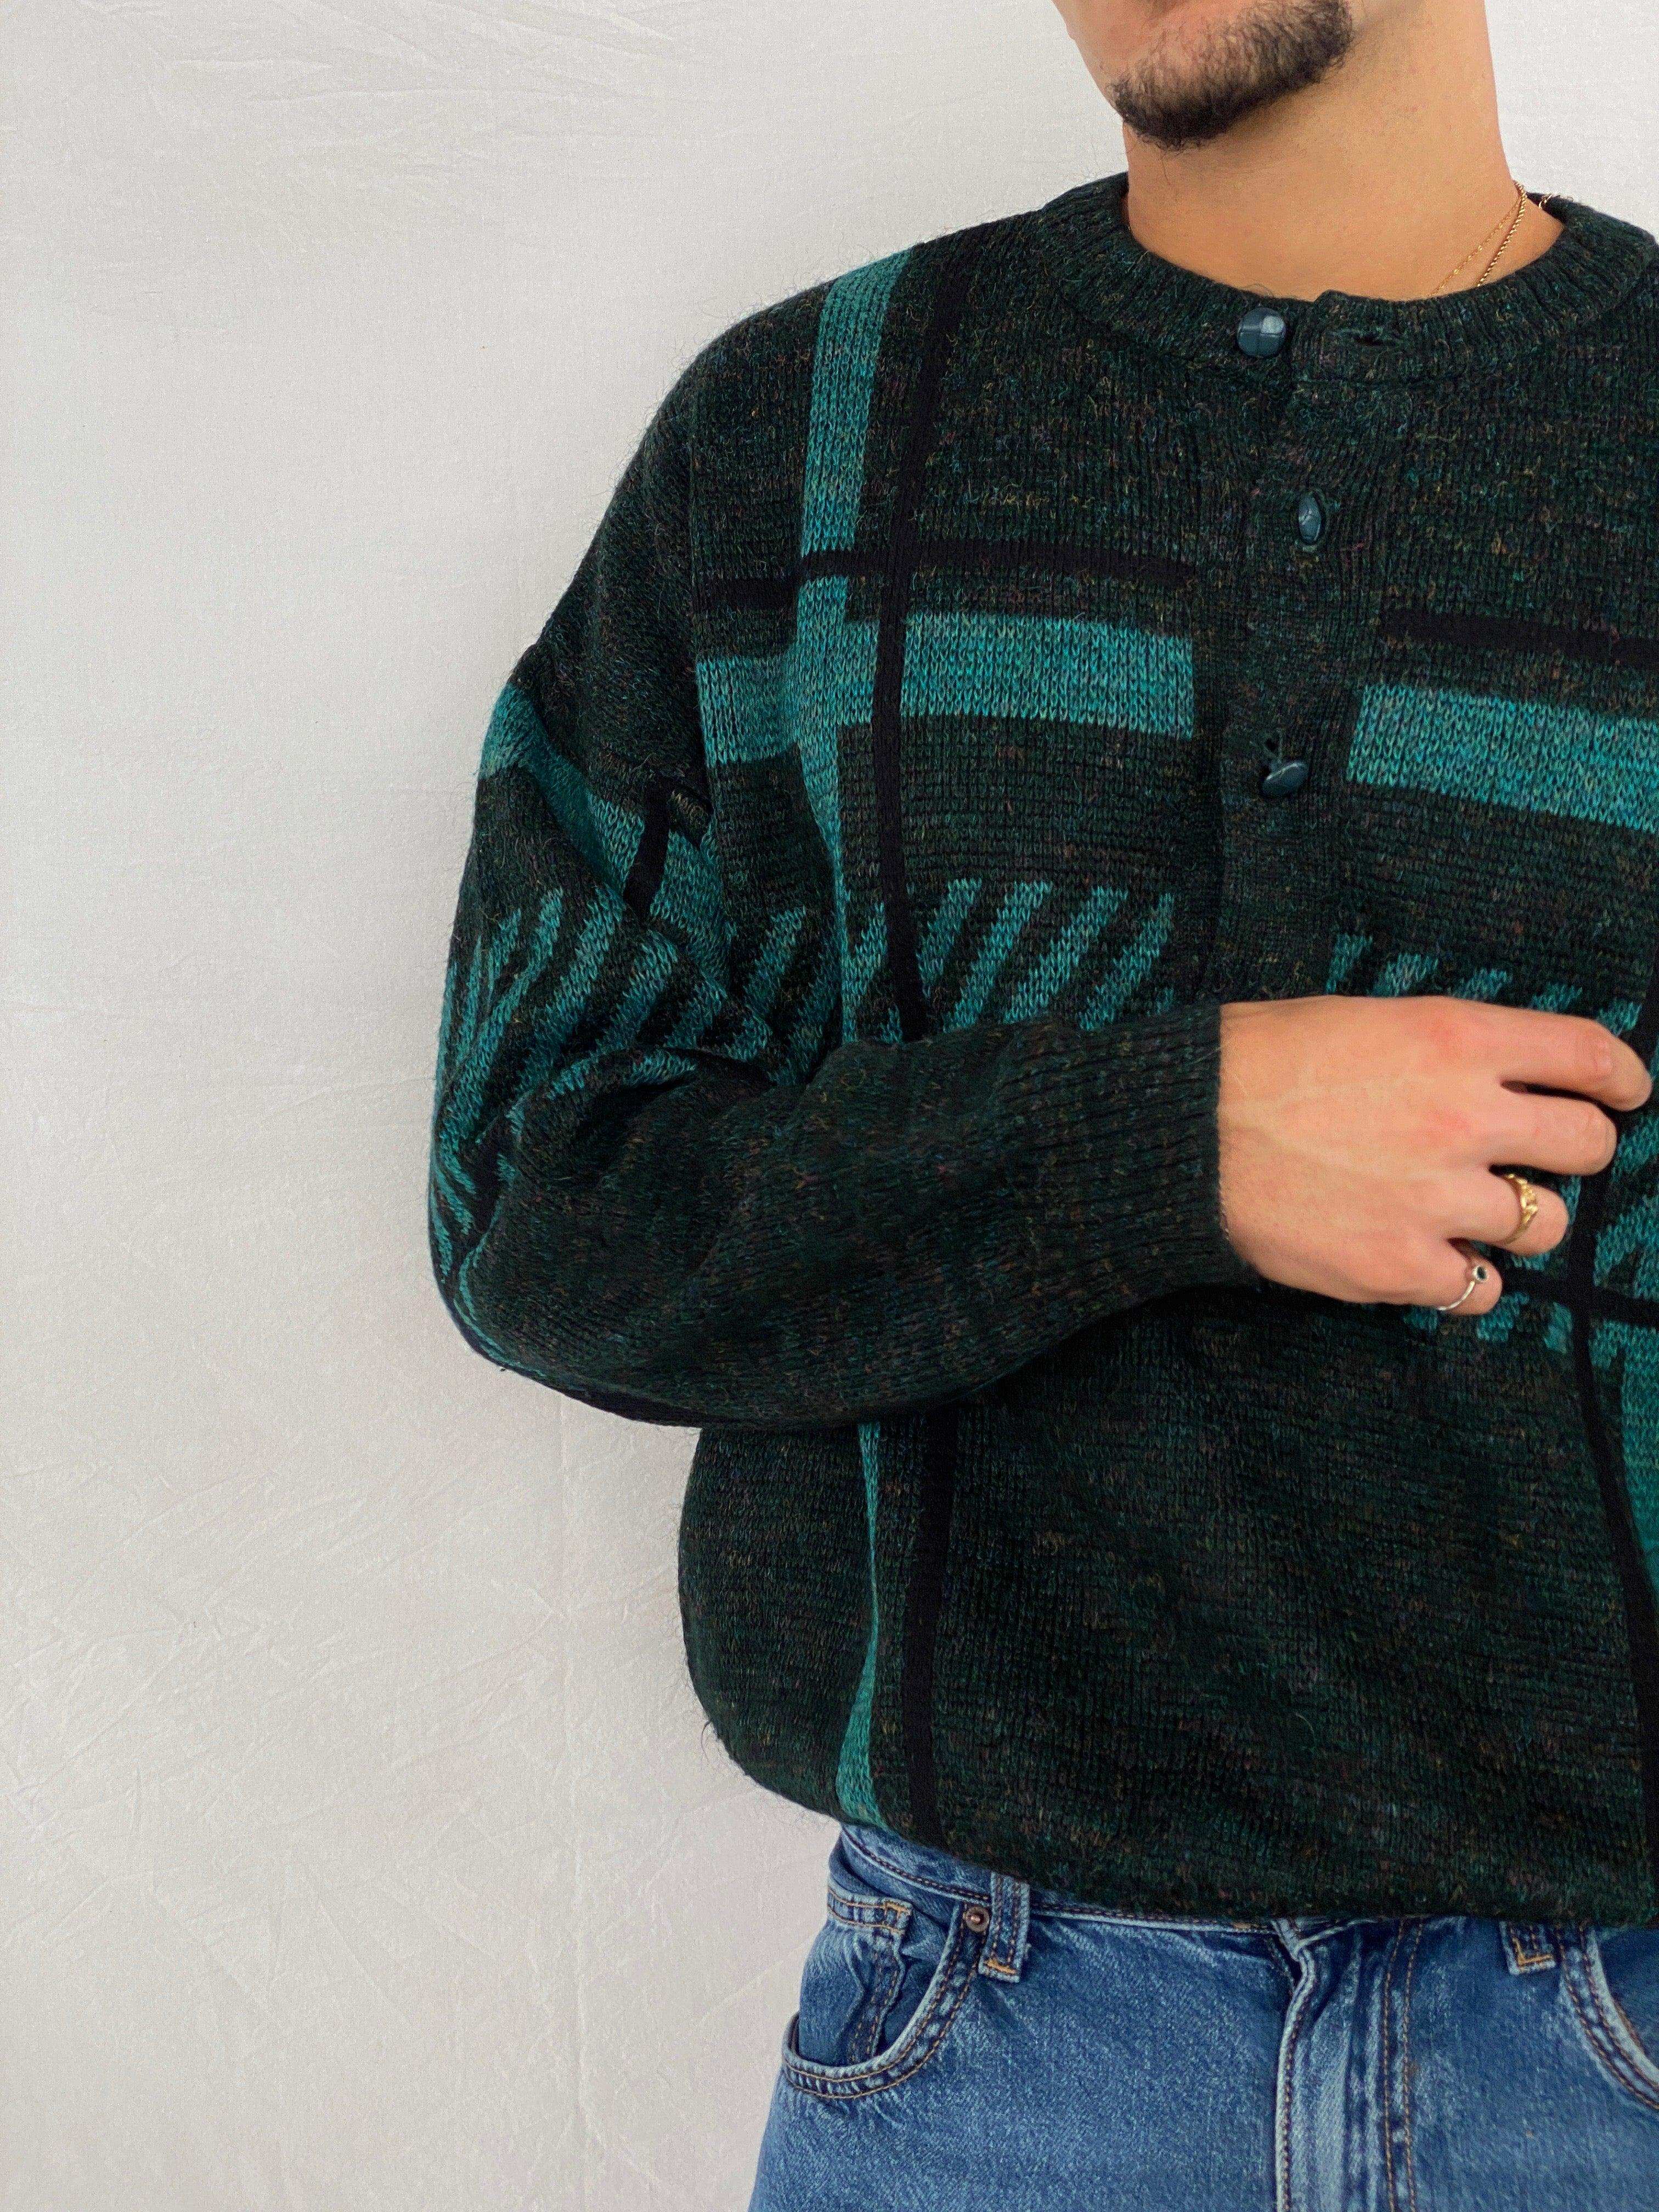 Vintage 90s Chewitt Knitted Sweater - Balagan Vintage Sweater 90s, Abdullah, knitted sweater, NEW IN, sweater, vintage sweater